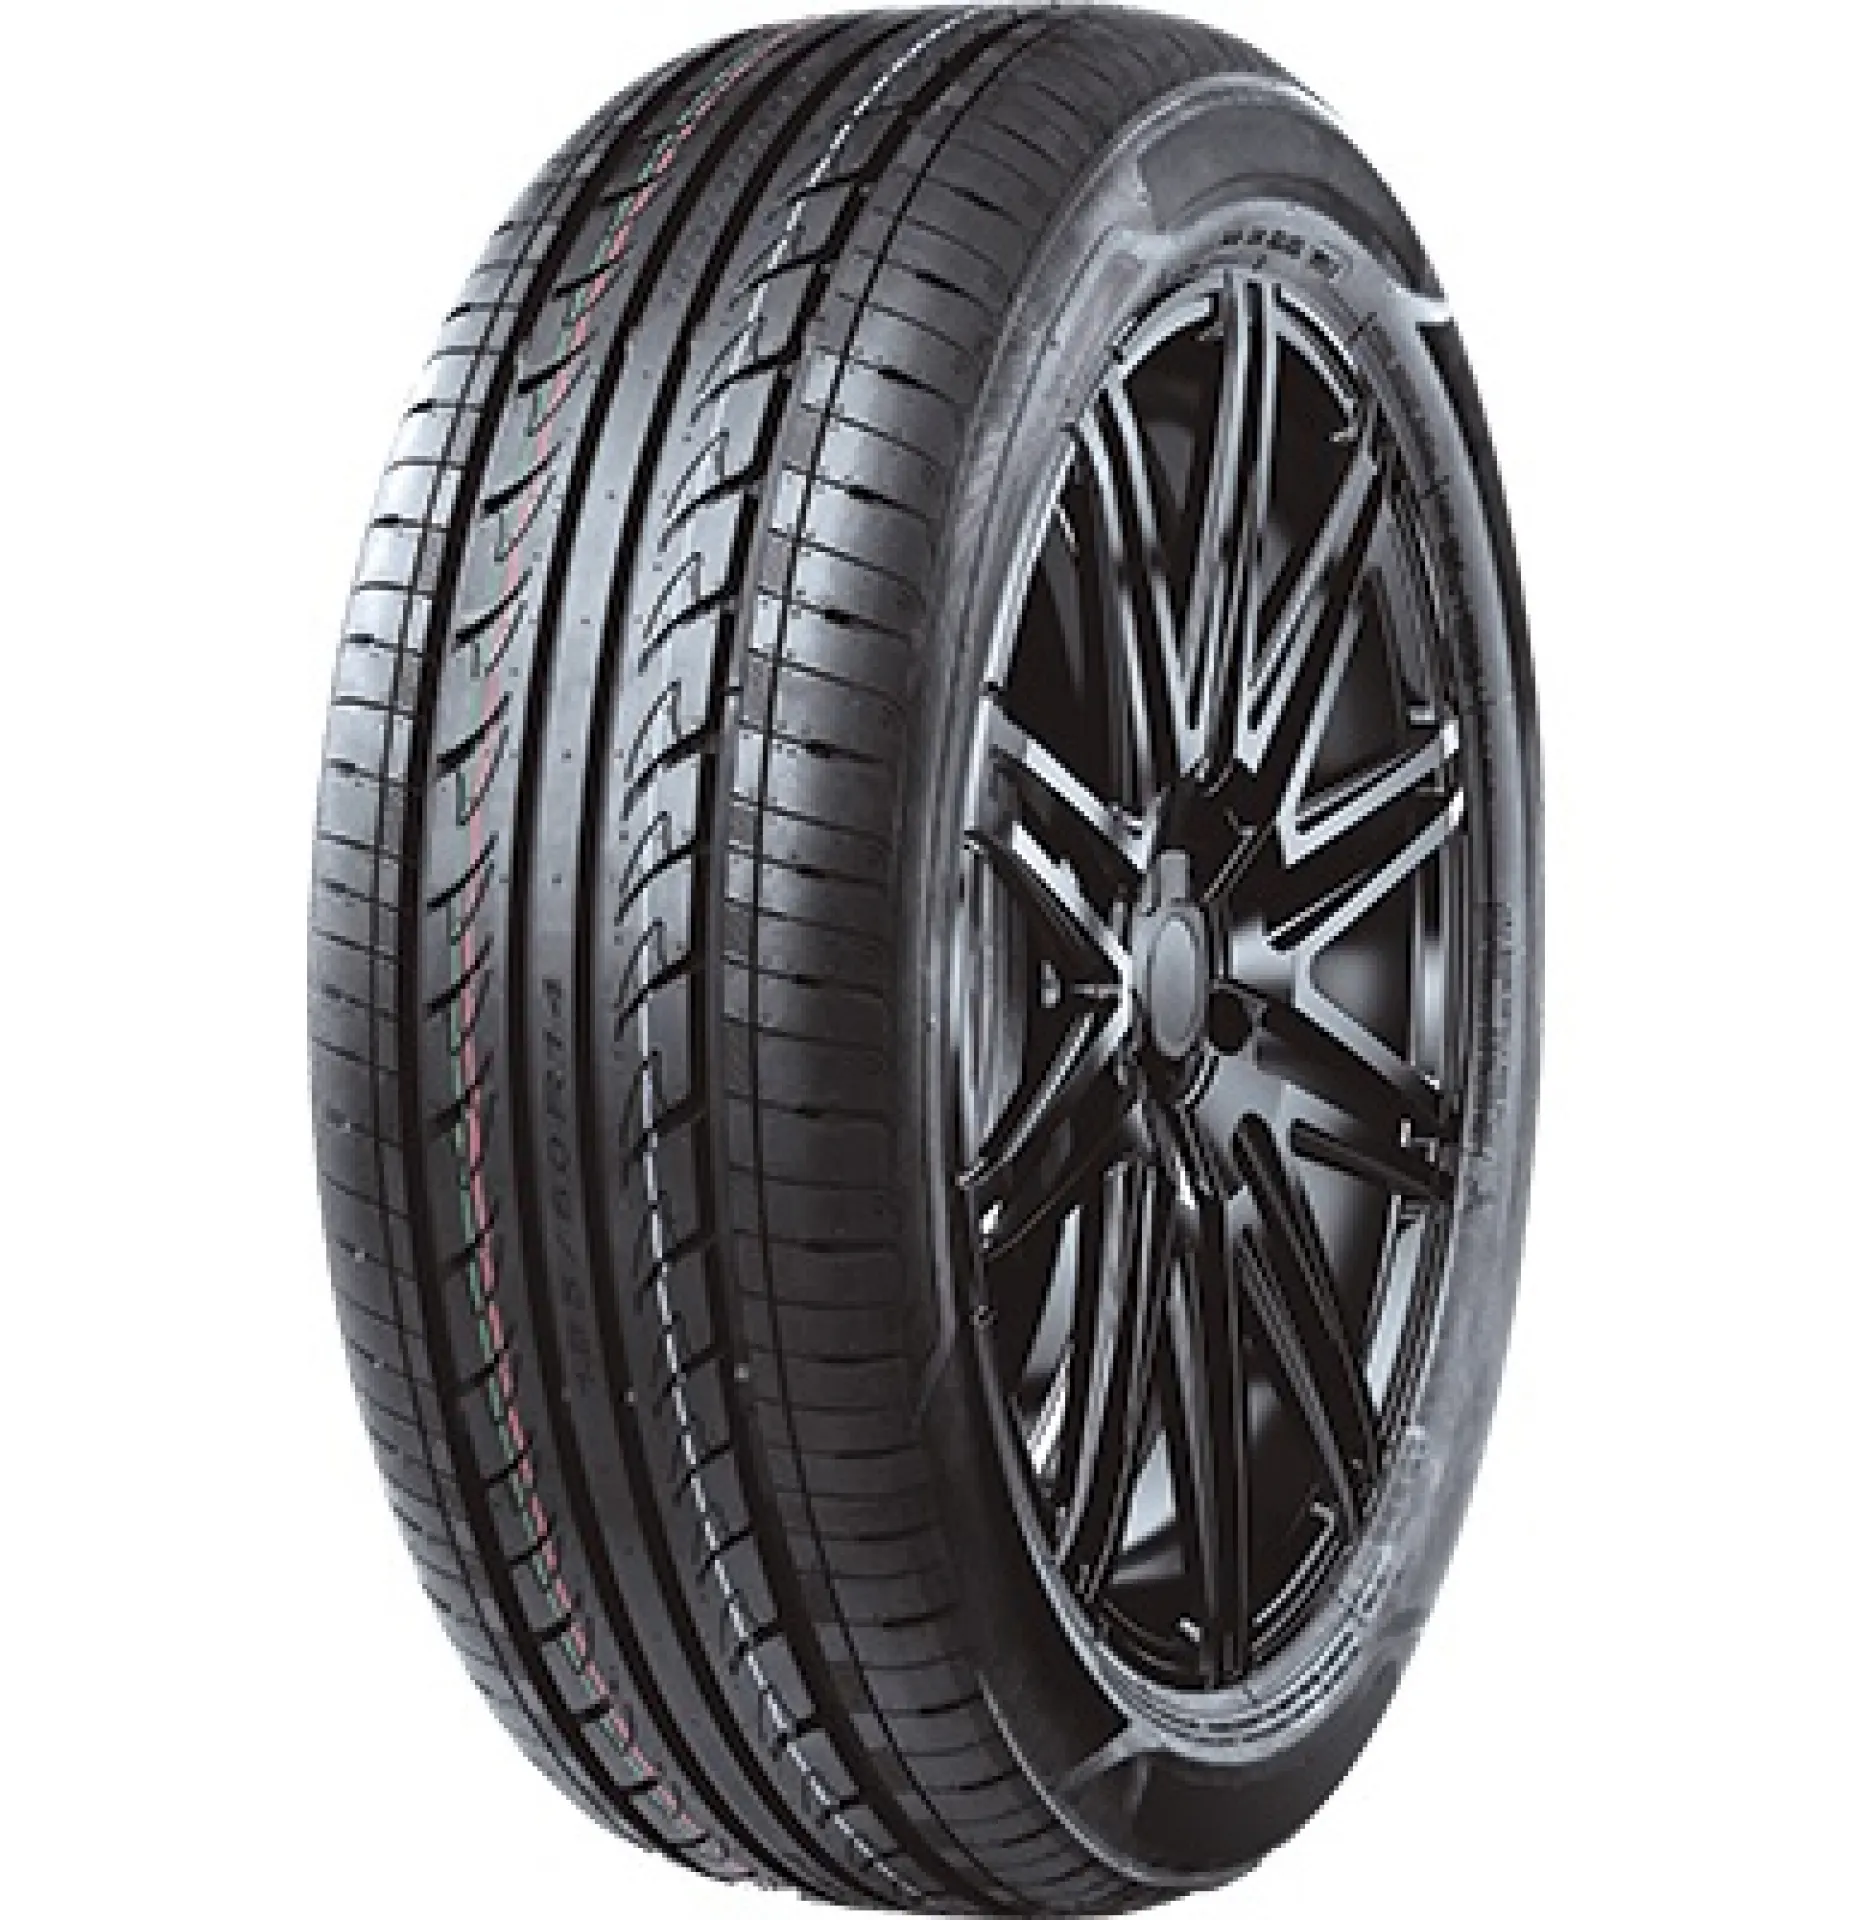 T-Tyre Two 155/80R13 79T